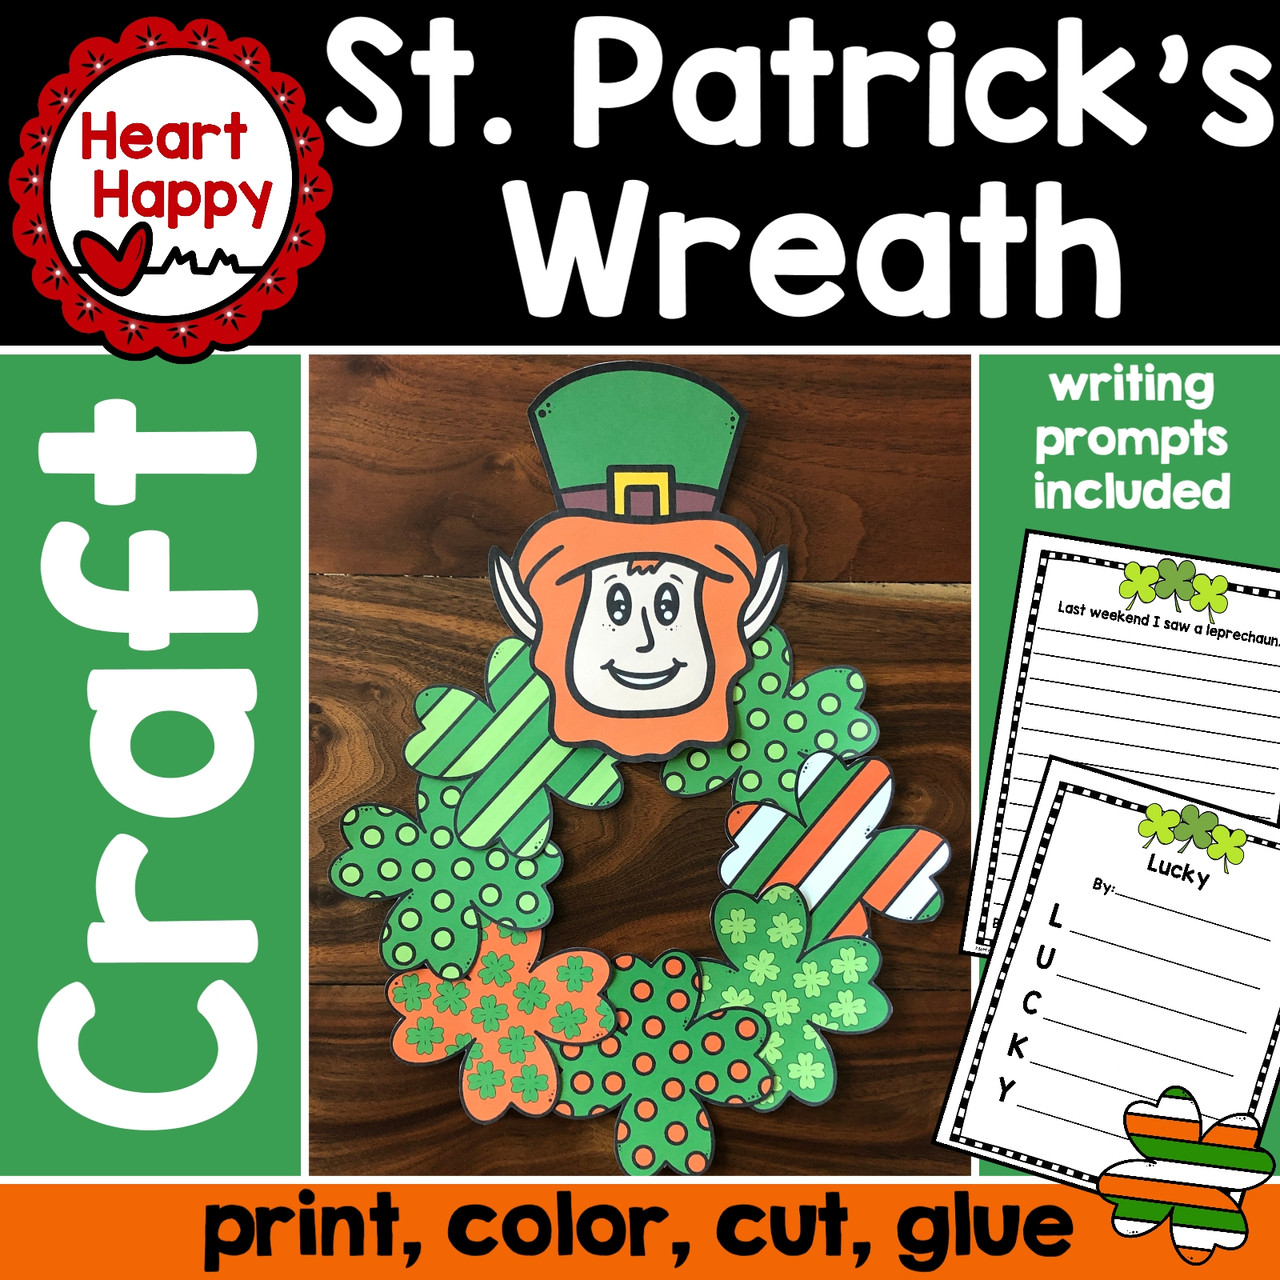 St patricks day wreath craft writing prompts